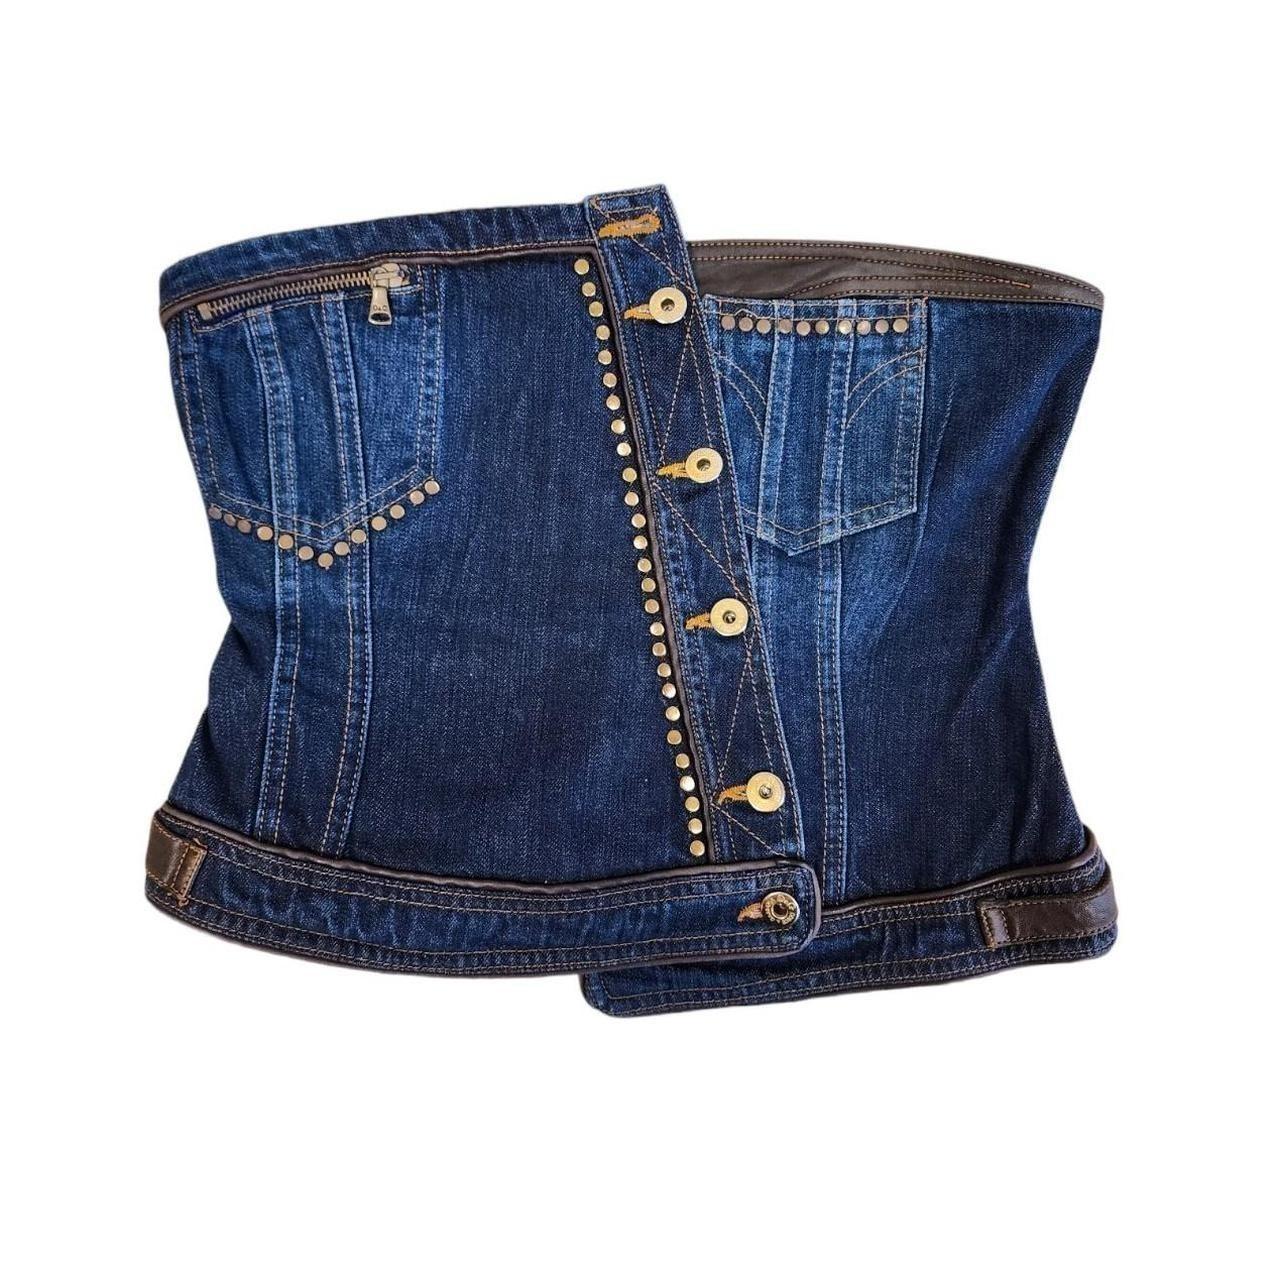 Pepe Jeans Bustier - navy/blue 